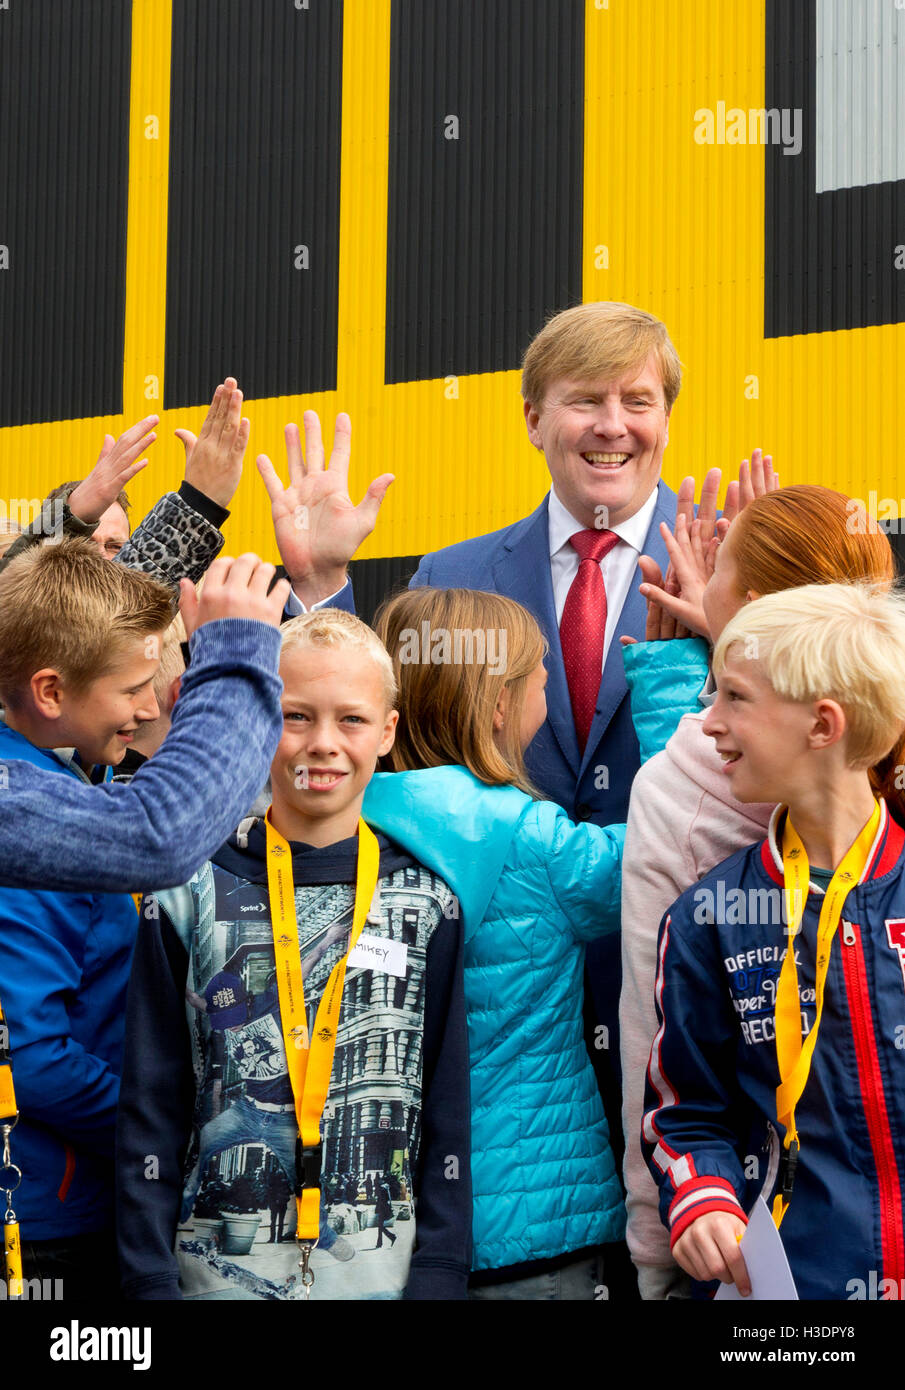 Deurningen, The Netherlands. 6th Oct, 2016. King Willem-Alexander of The Netherlands (C) visits the Twente Safety Campus in Deurningen, The Netherlands, 6 October 2016. At the campus school children and the elderly how to react in dangerous situations. Photo: RPE/Albert Nieboer/ /POINT DE VUE OUT/dpa/Alamy Live News Stock Photo